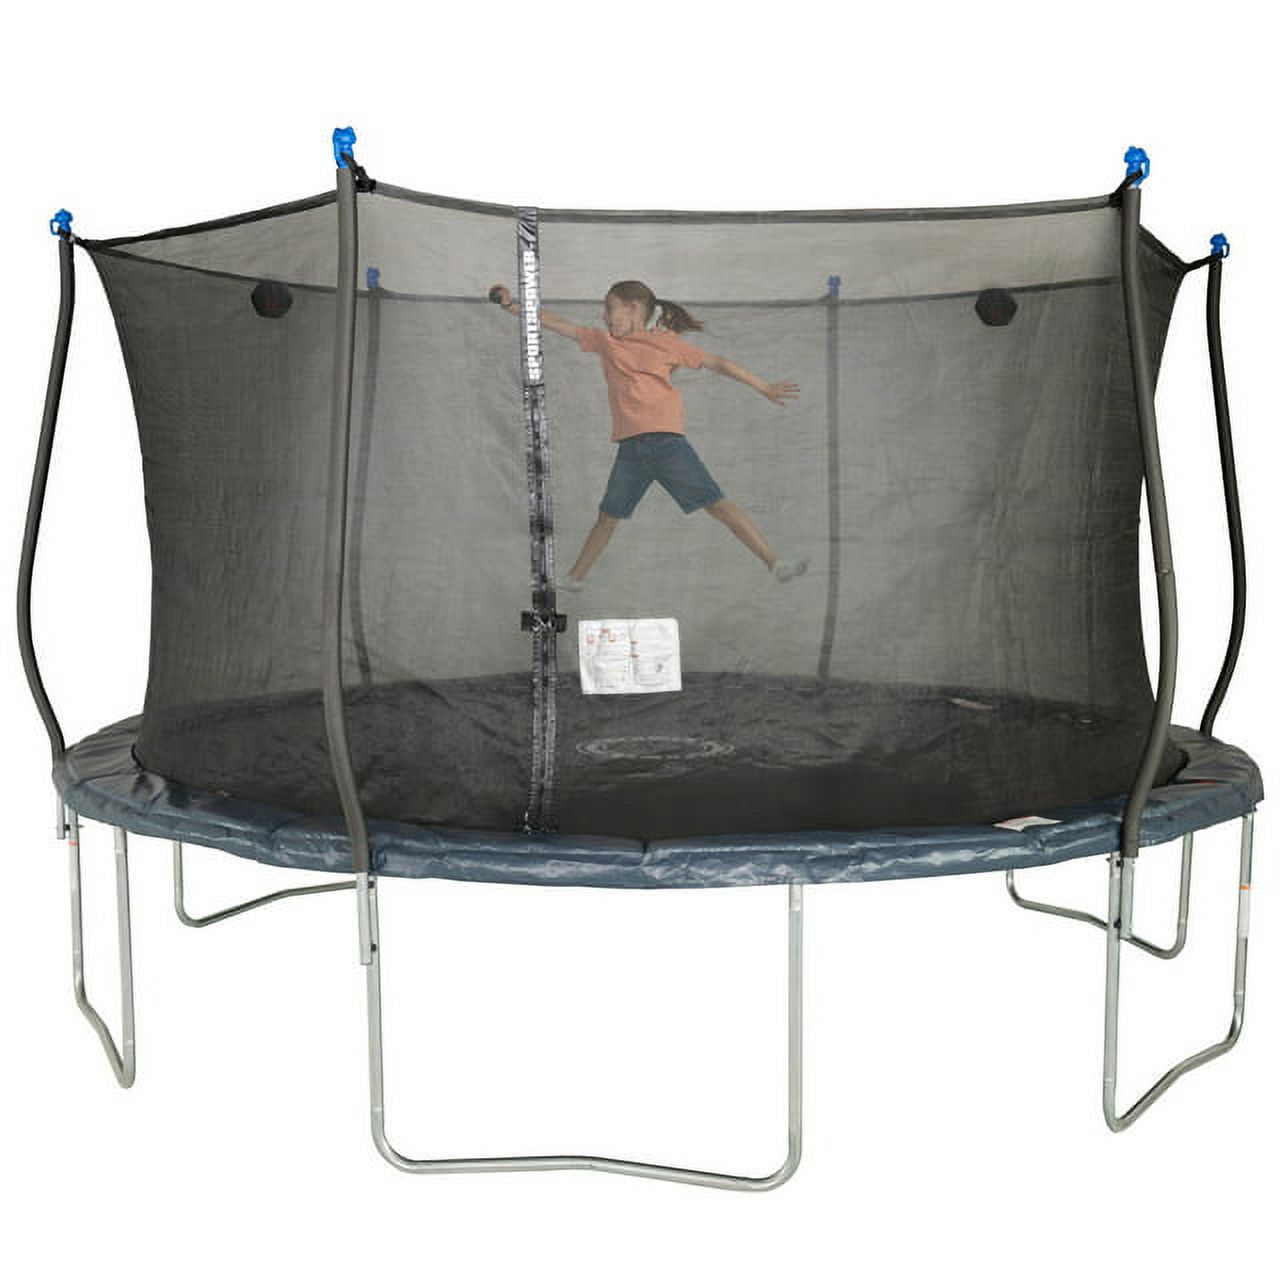 Bounce Pro 14-Foot Trampoline, Electron Shooter Game, Classic Safety Enclosure, Midnight Blue - image 1 of 1